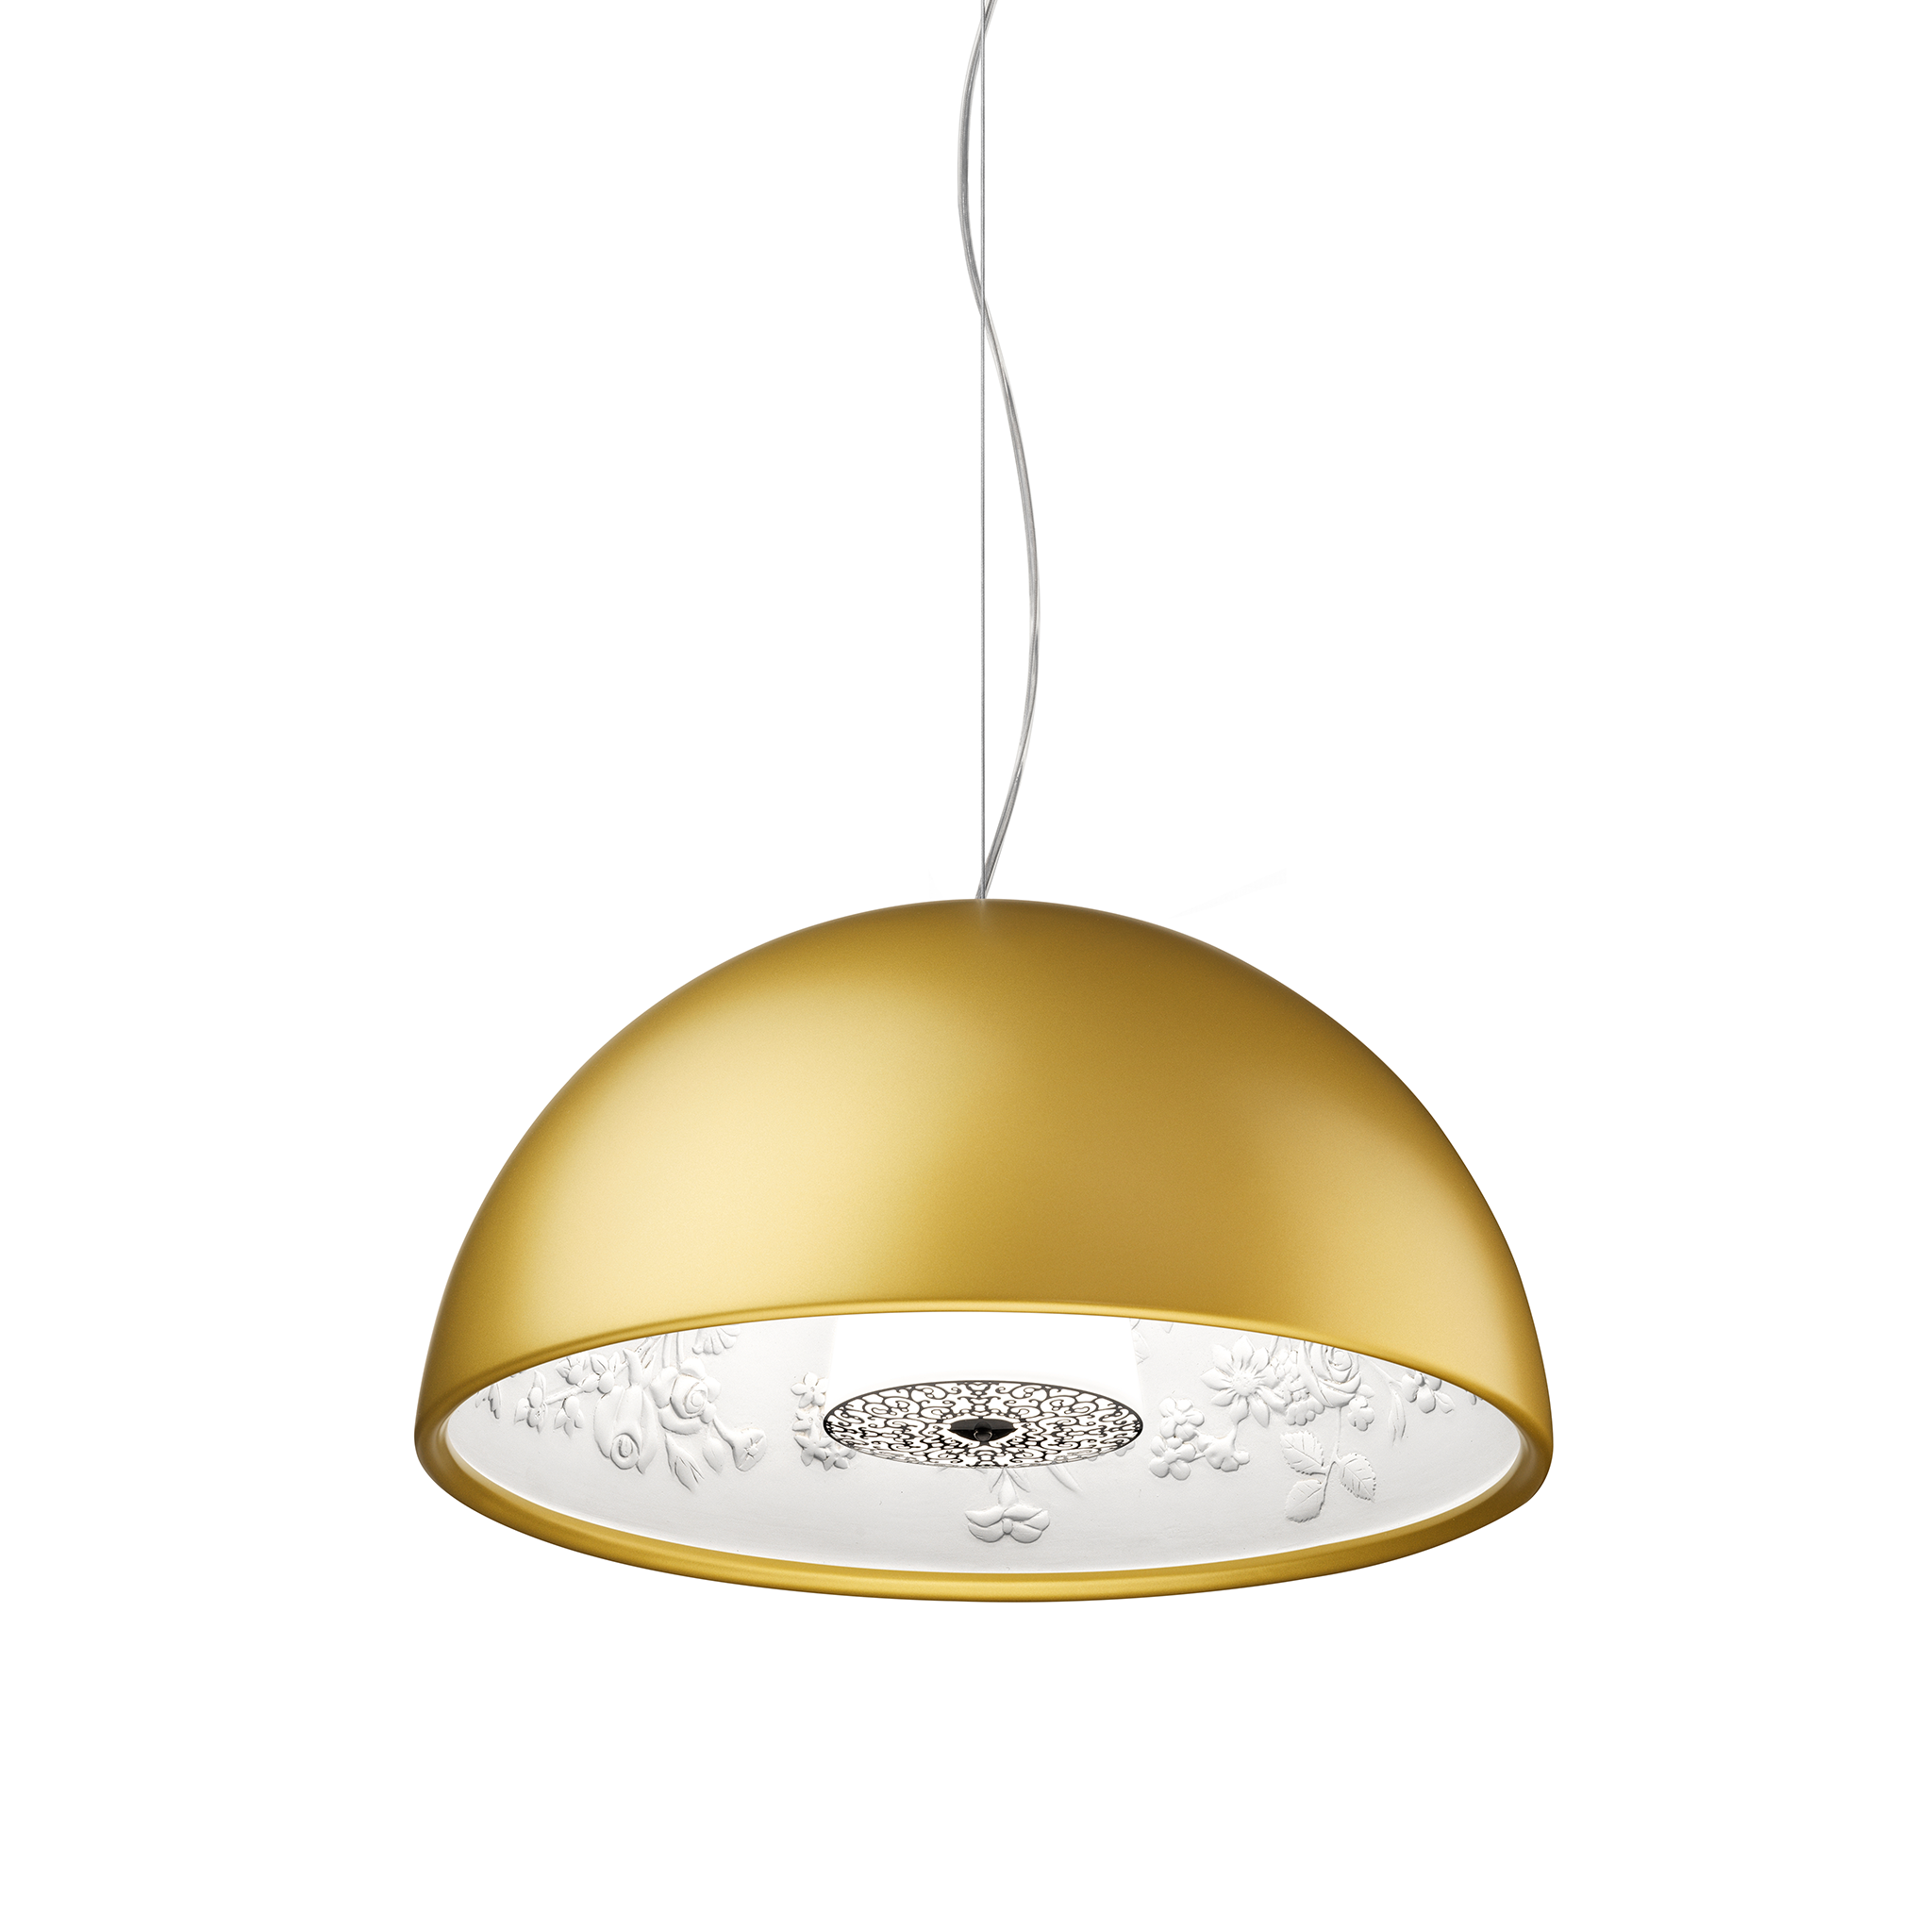 Skygarden Small by Marcel Wanders for Flos